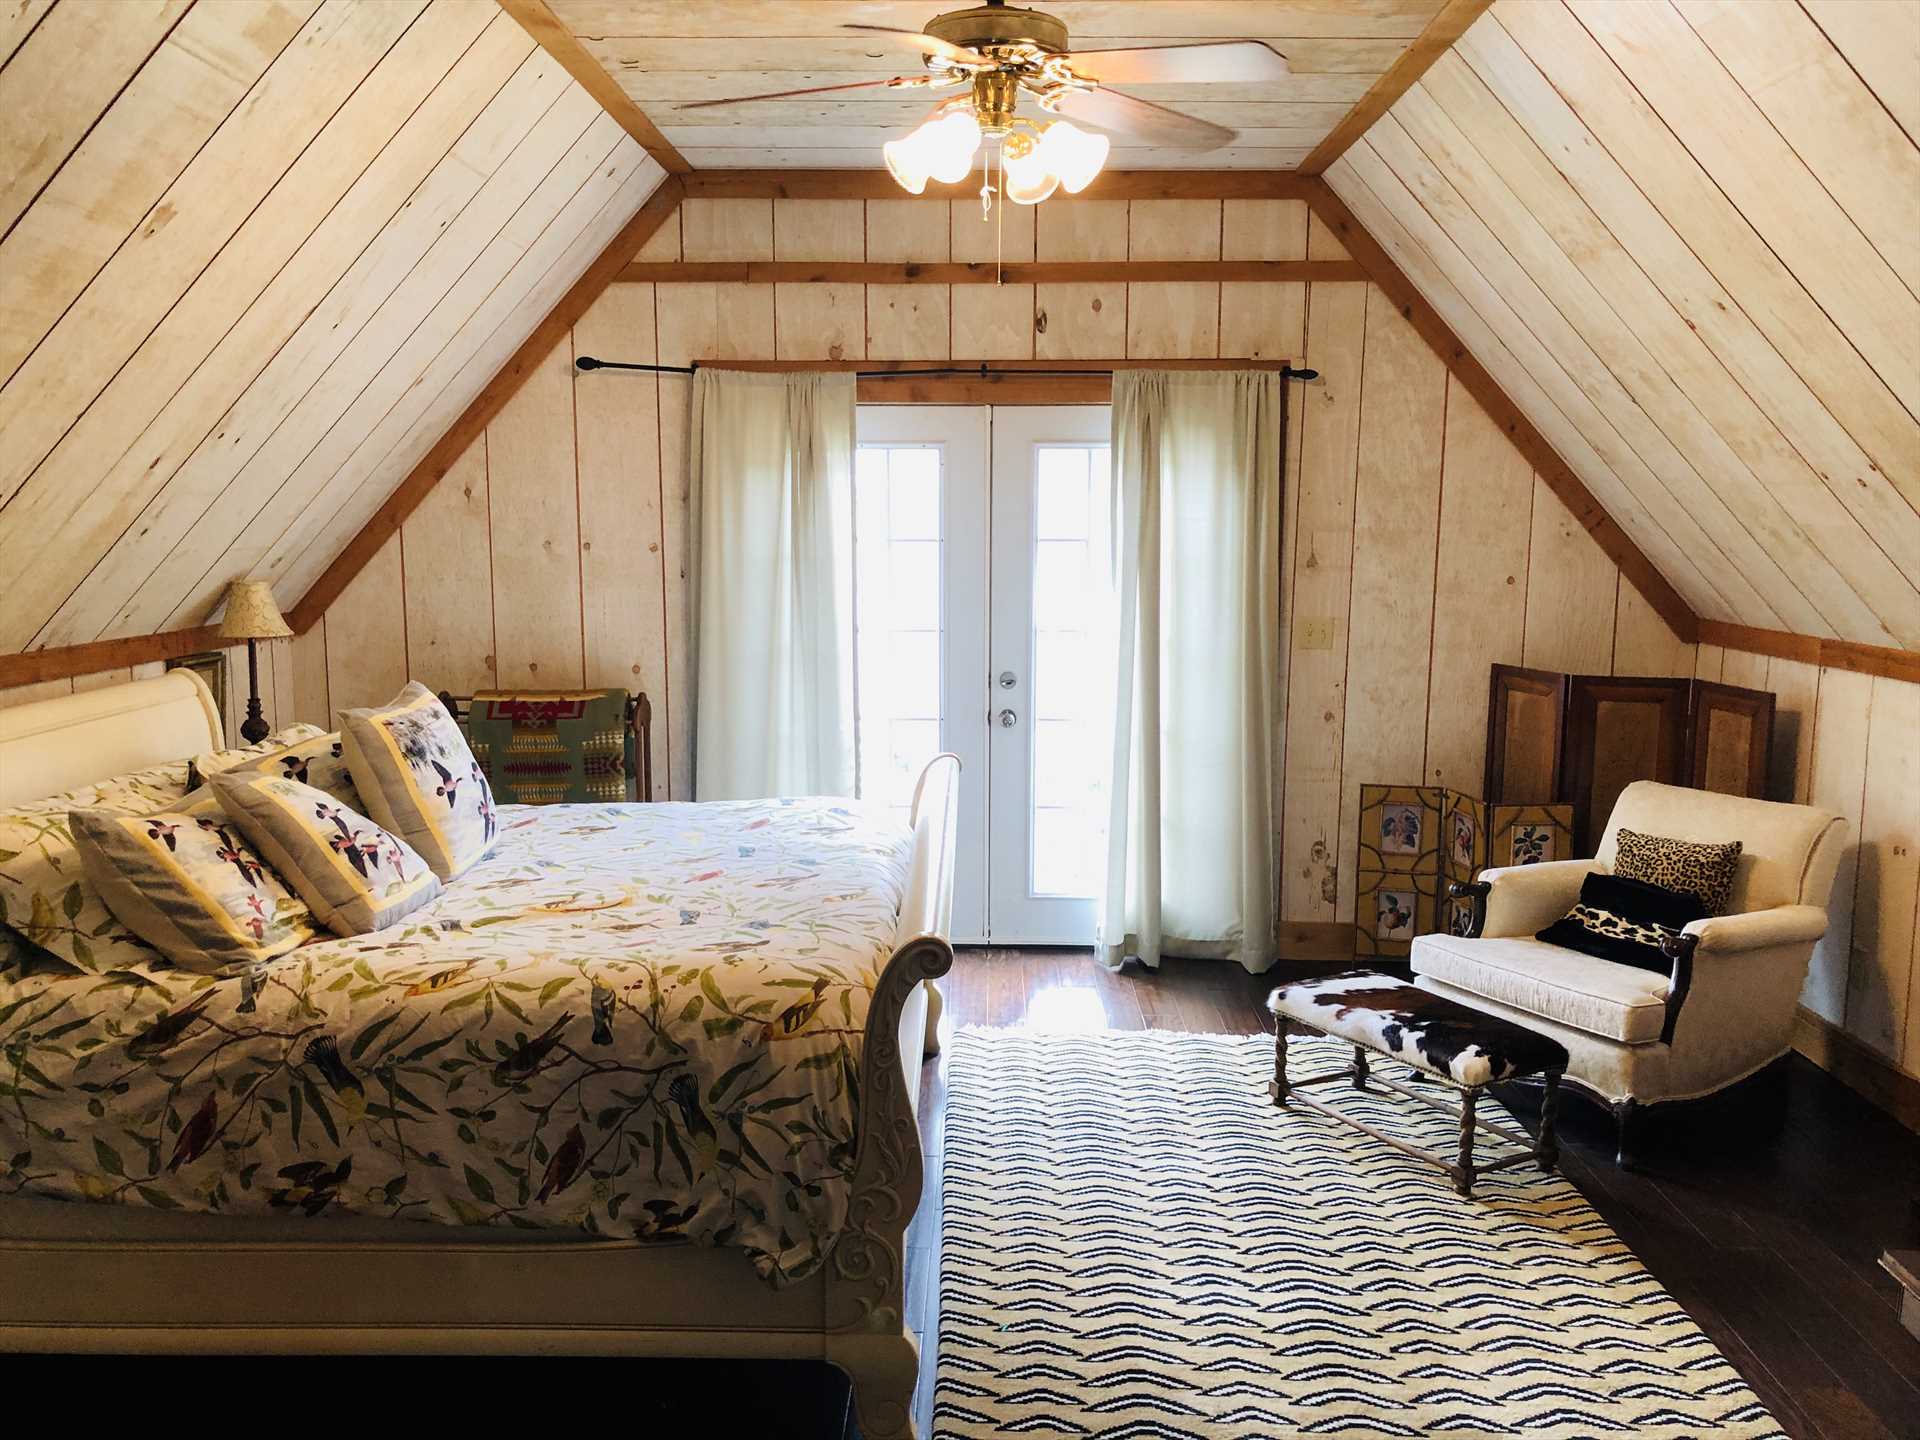                                                 A great big king-sized bed is the perfect place for pillow talk and restful slumber in your Hill Country haven.